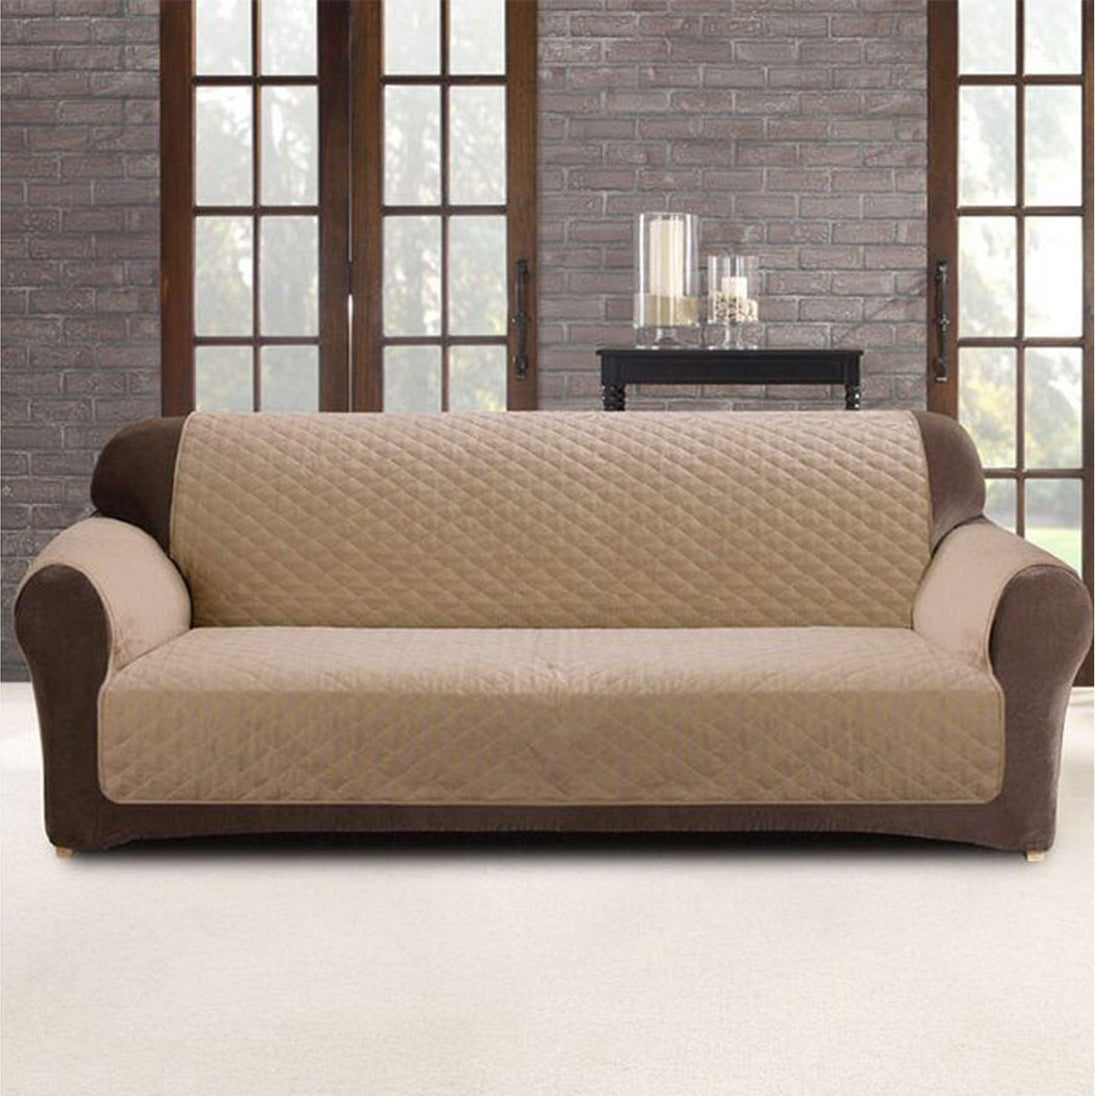 Custom Fit Sofa Cover Protector Two Seater Dark Flax (Latte) Products On Sale Australia | Home & Garden > Decor Category